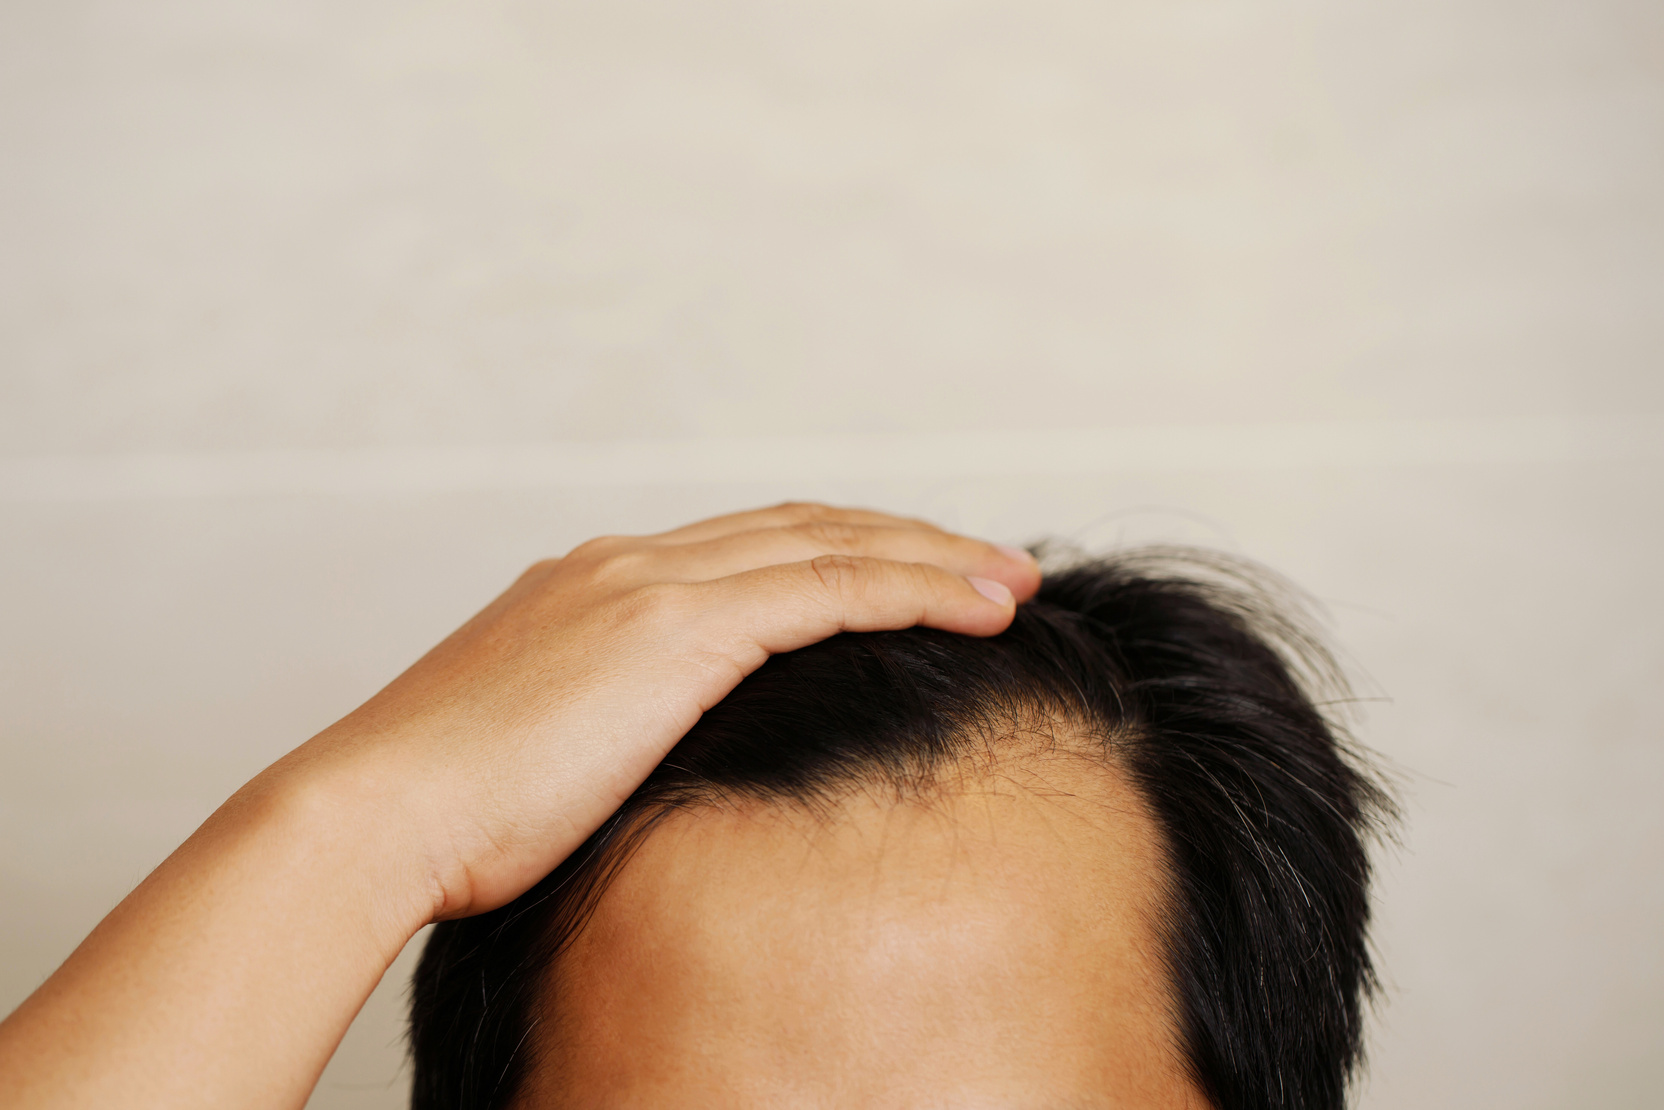 Bald men and gray hair are caused by stress.